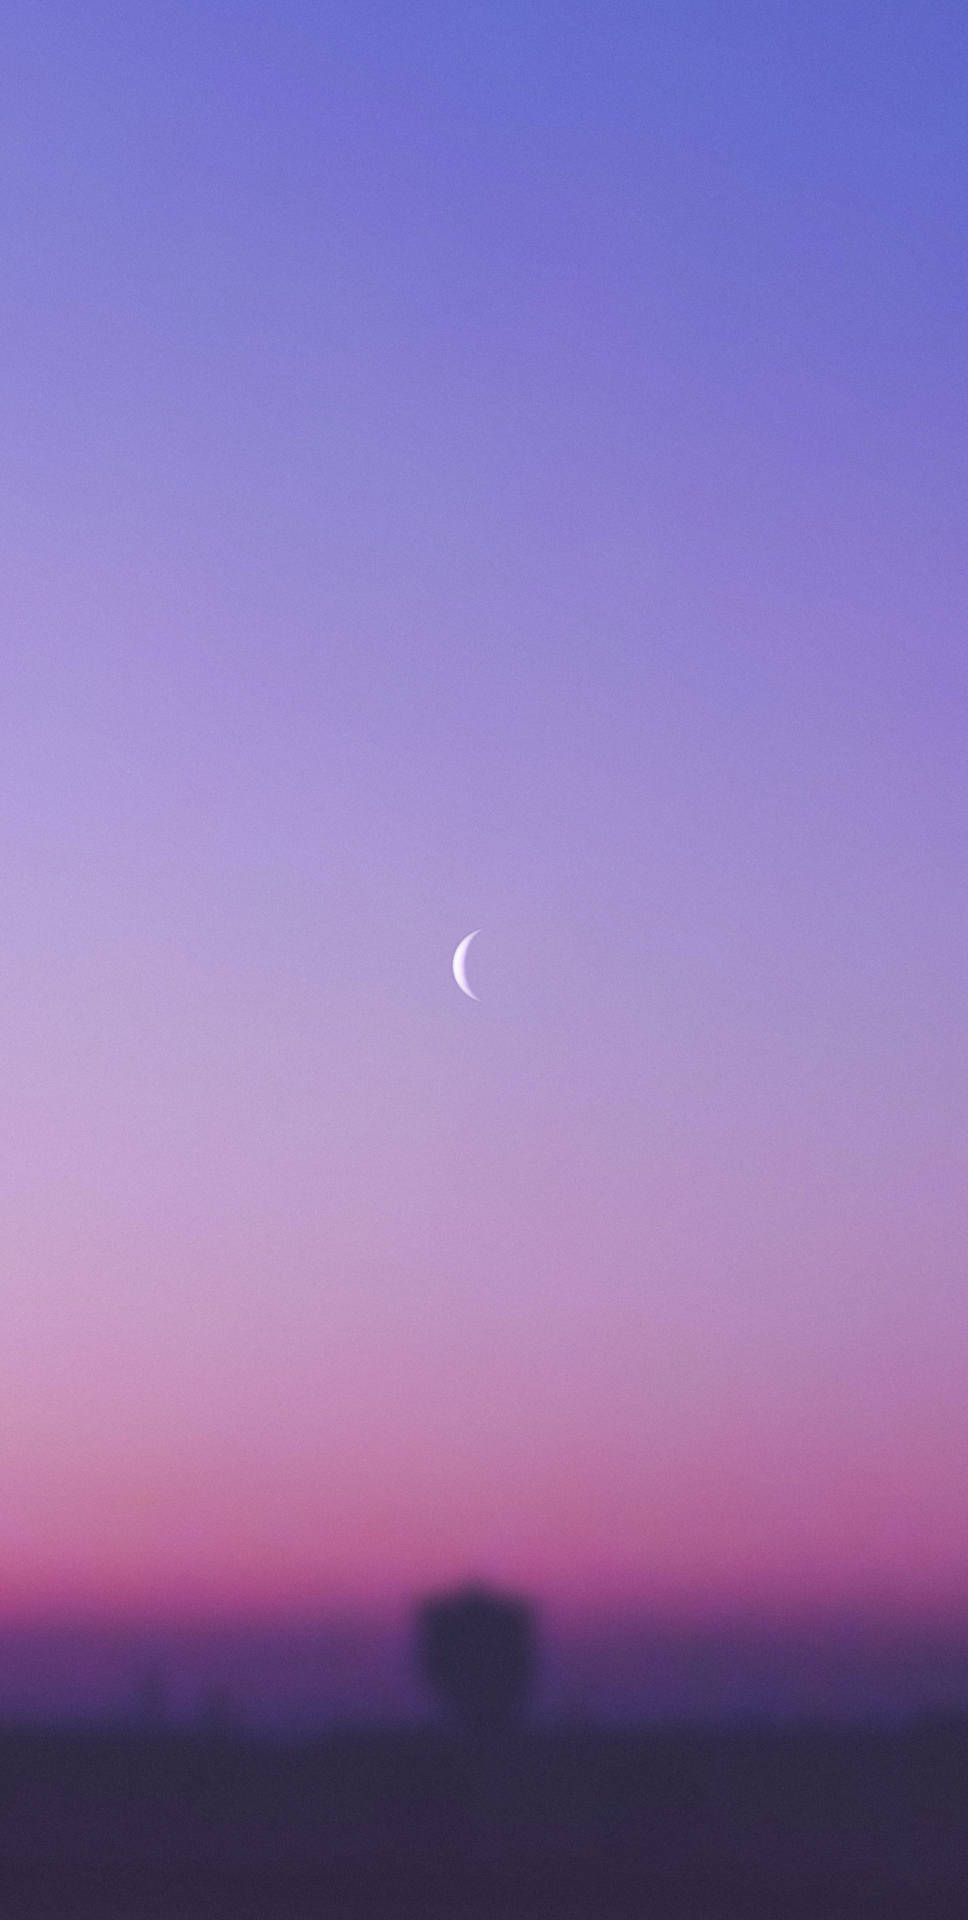 Purple Sky With Crescent Moon Background